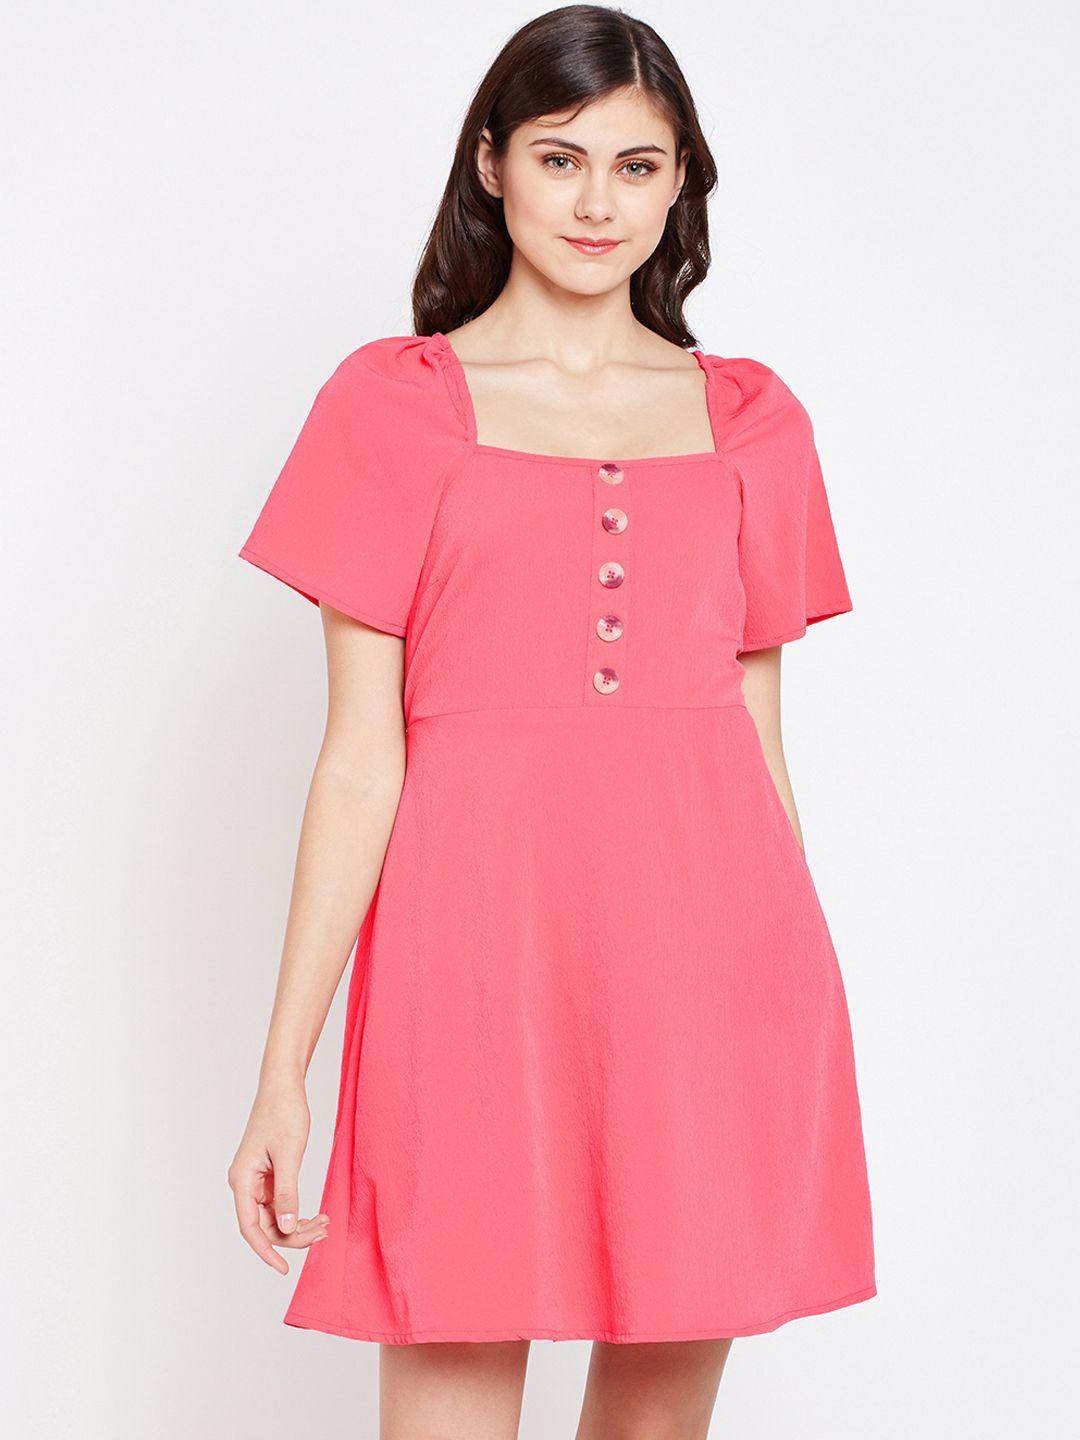 oxolloxo women pink solid fit and flare dress